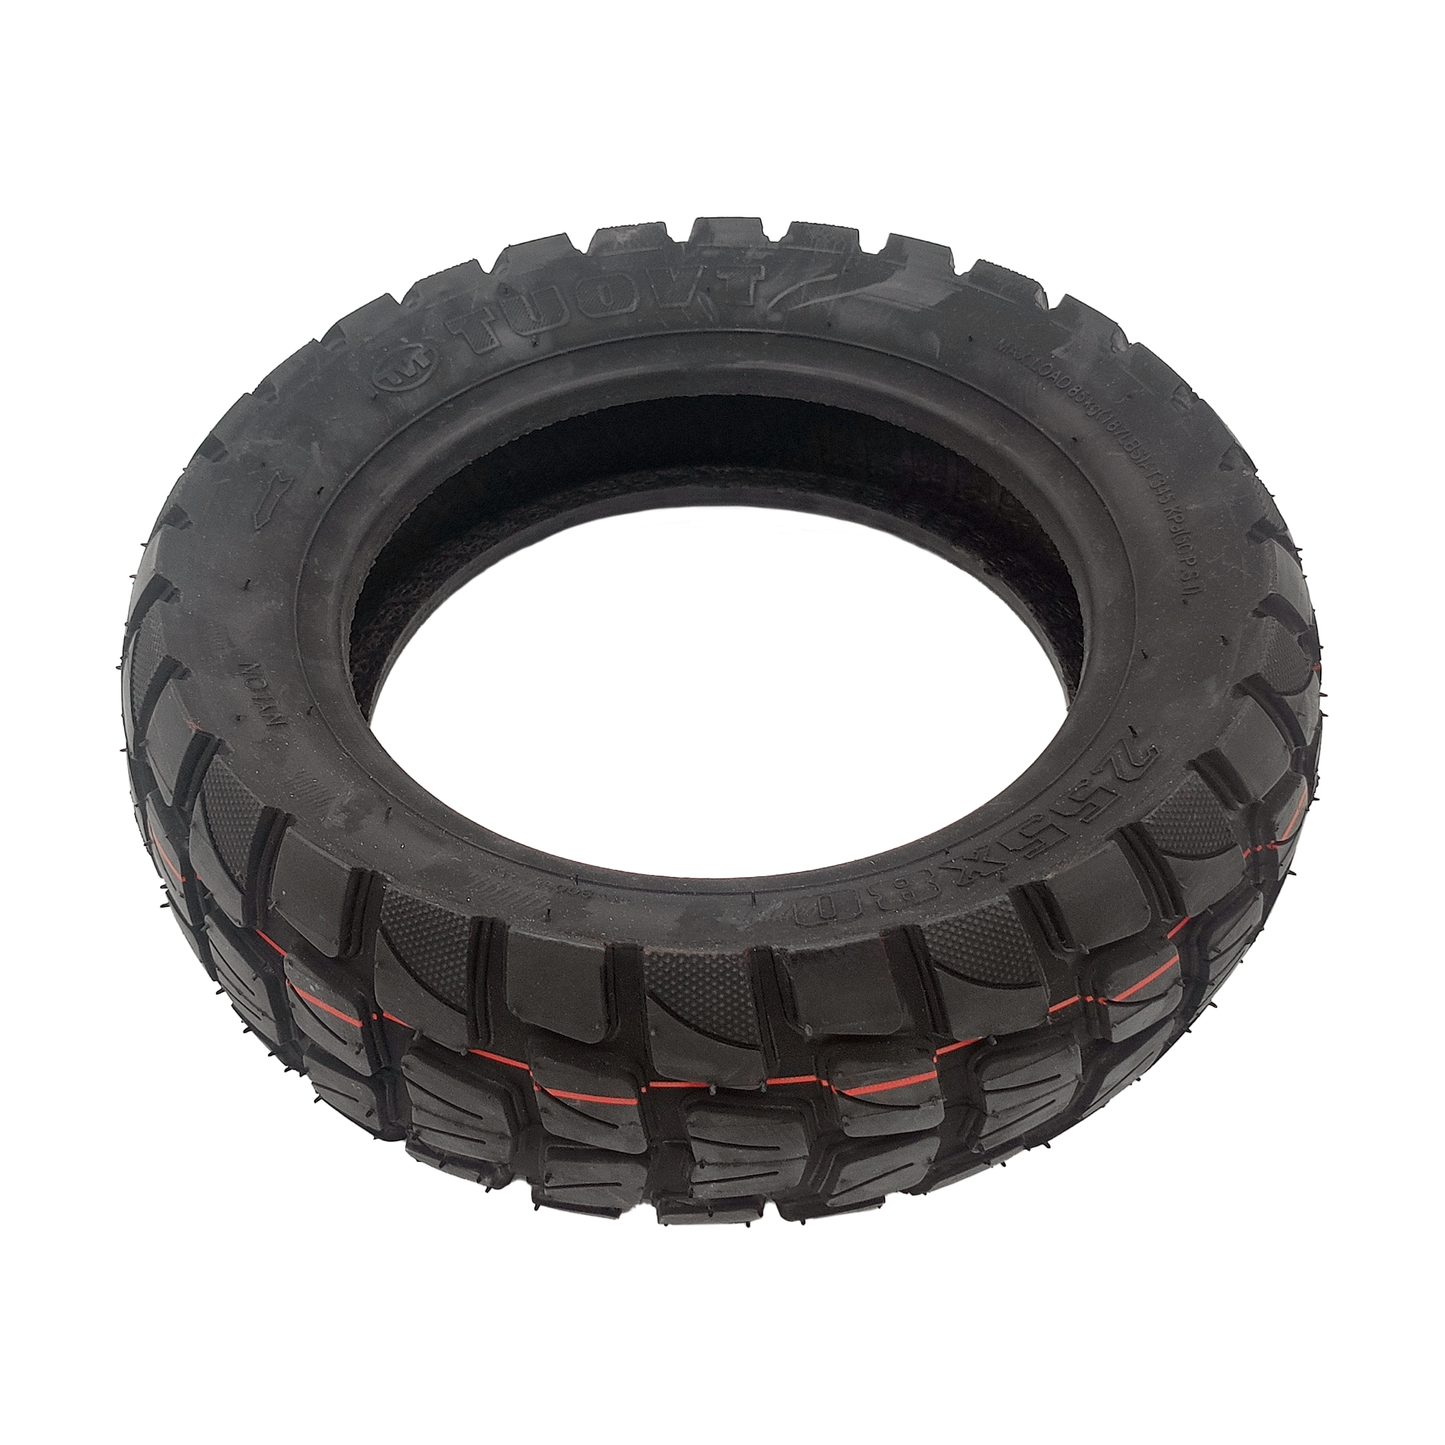 255x80 tire offroad with tube set 10x2.125 90° valve set